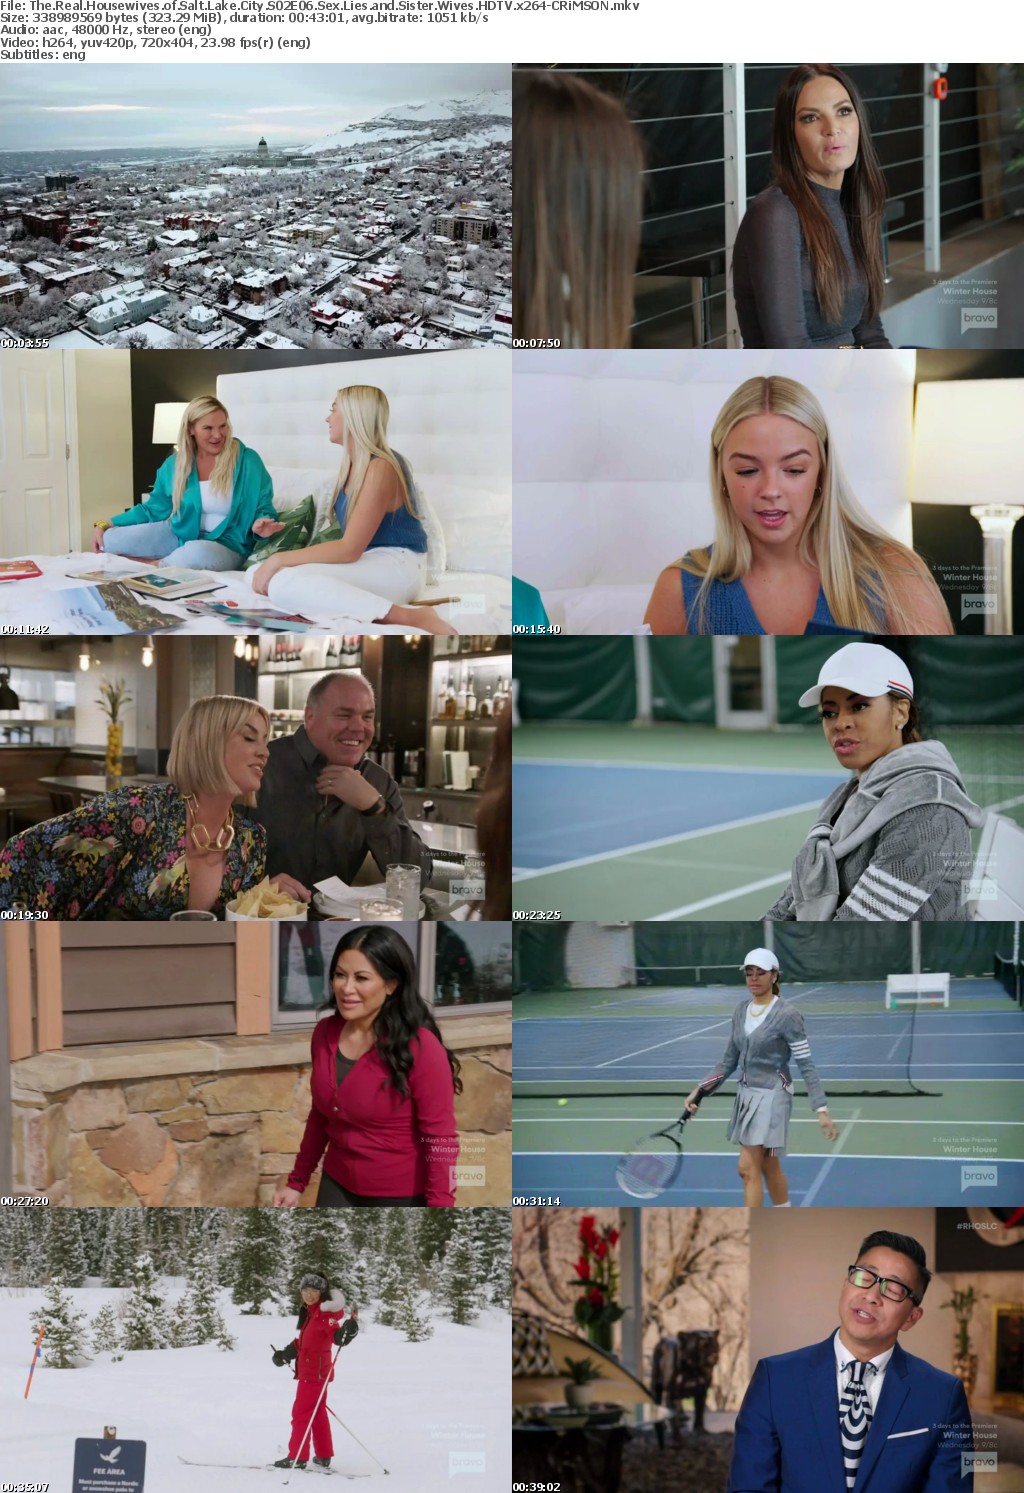 The Real Housewives of Salt Lake City S02E06 Sex Lies and Sister Wives HDTV x264-CRiMSON